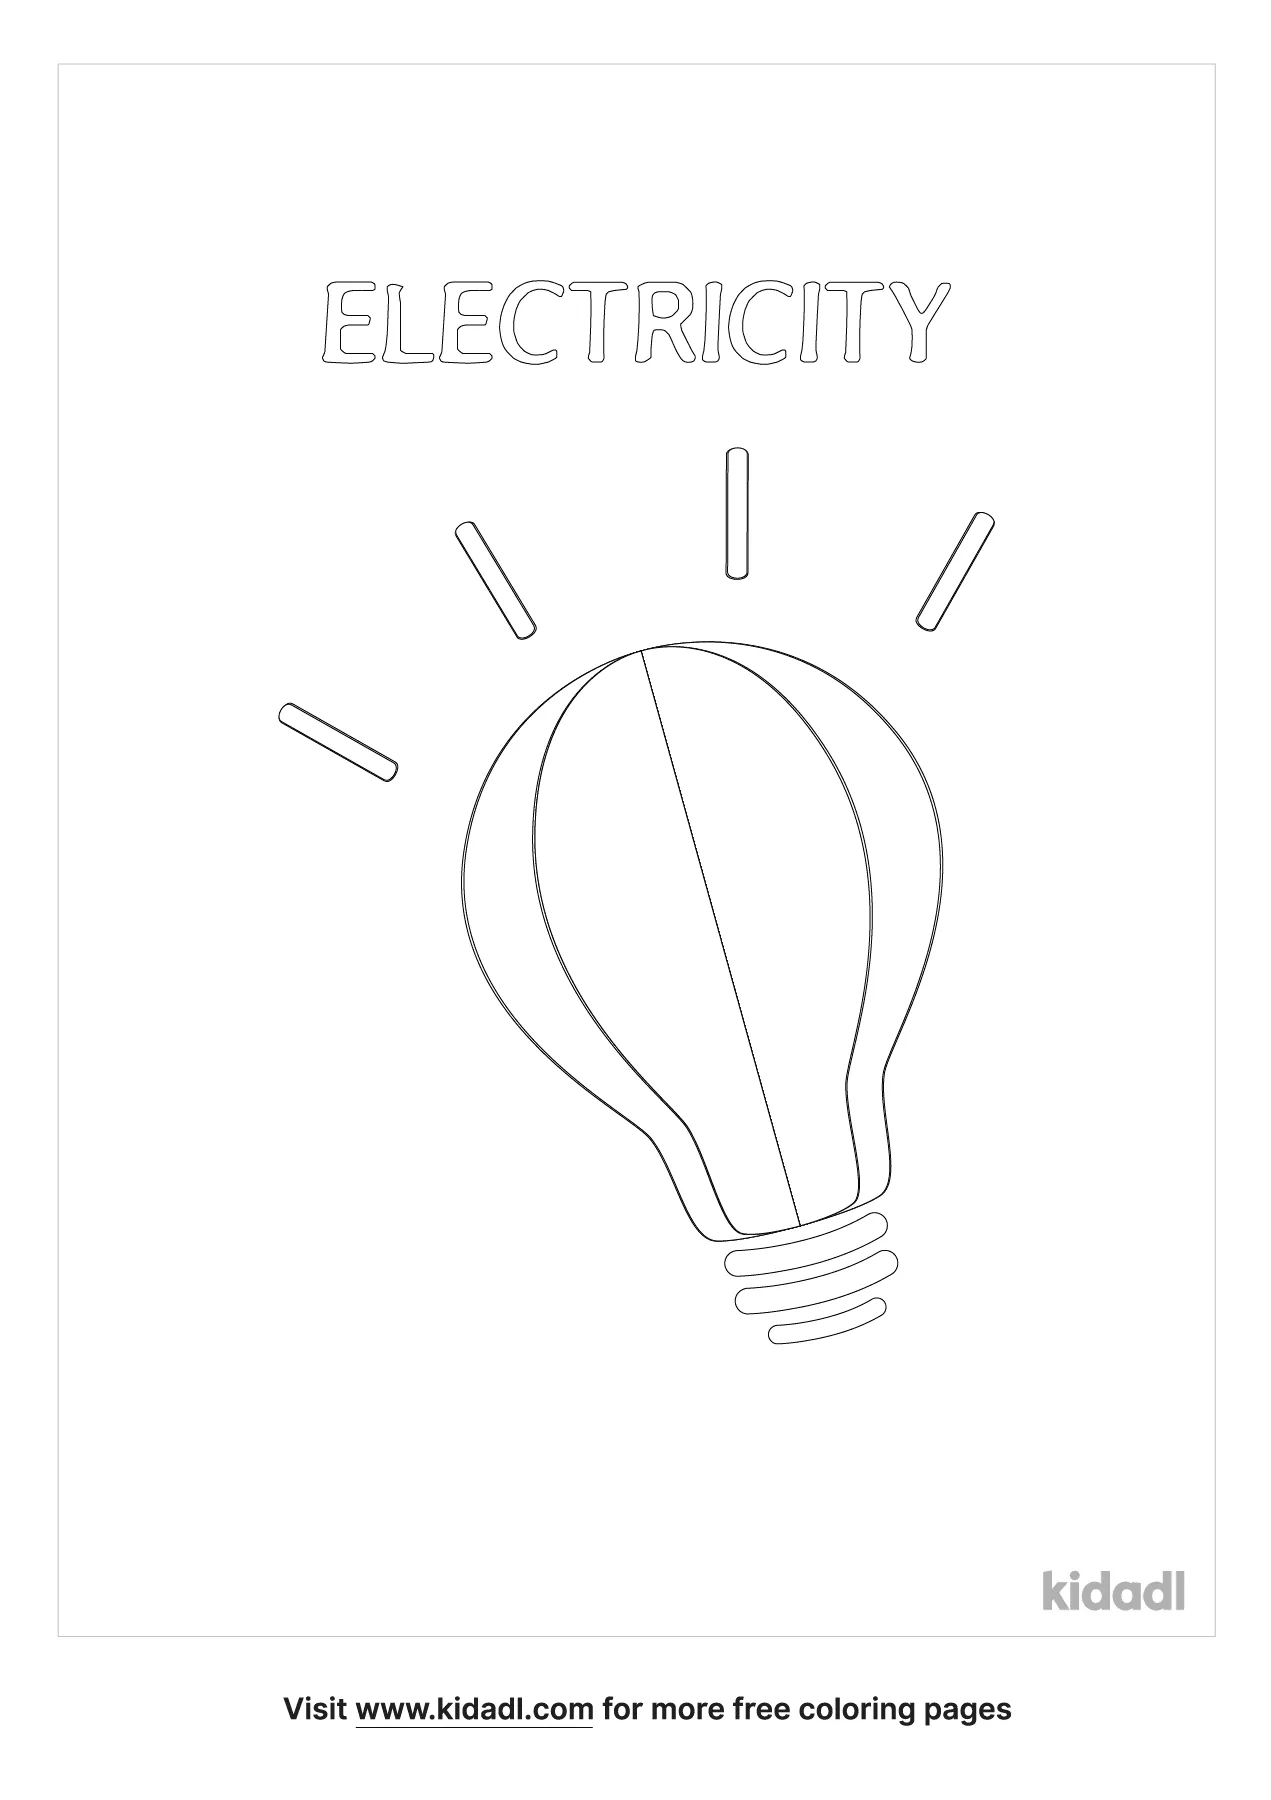 Electricity Coloring Pages For Kids